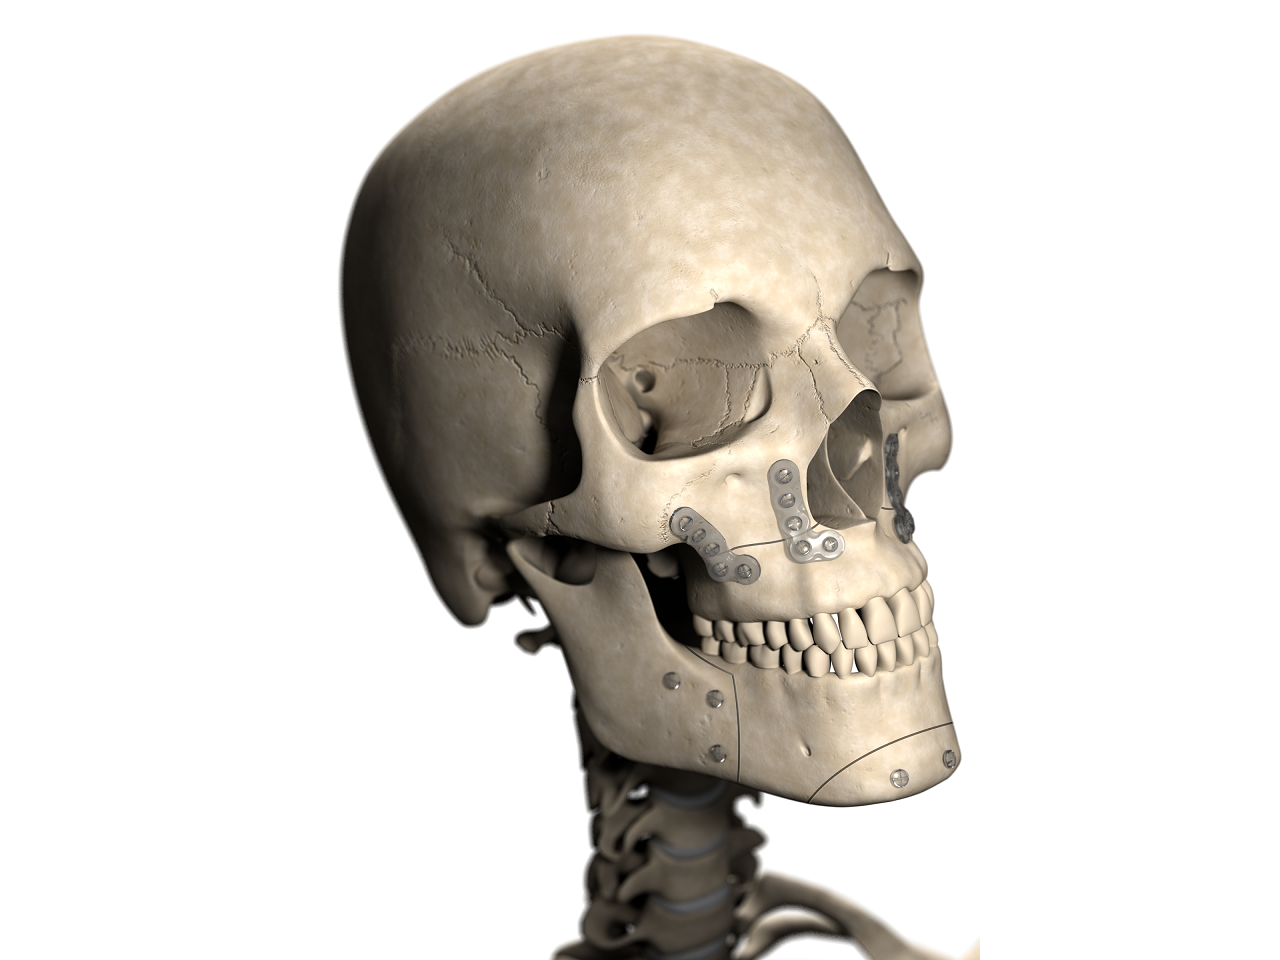 A human skull with fractures with bioabsorbable surgical plates and screws on the fractures.